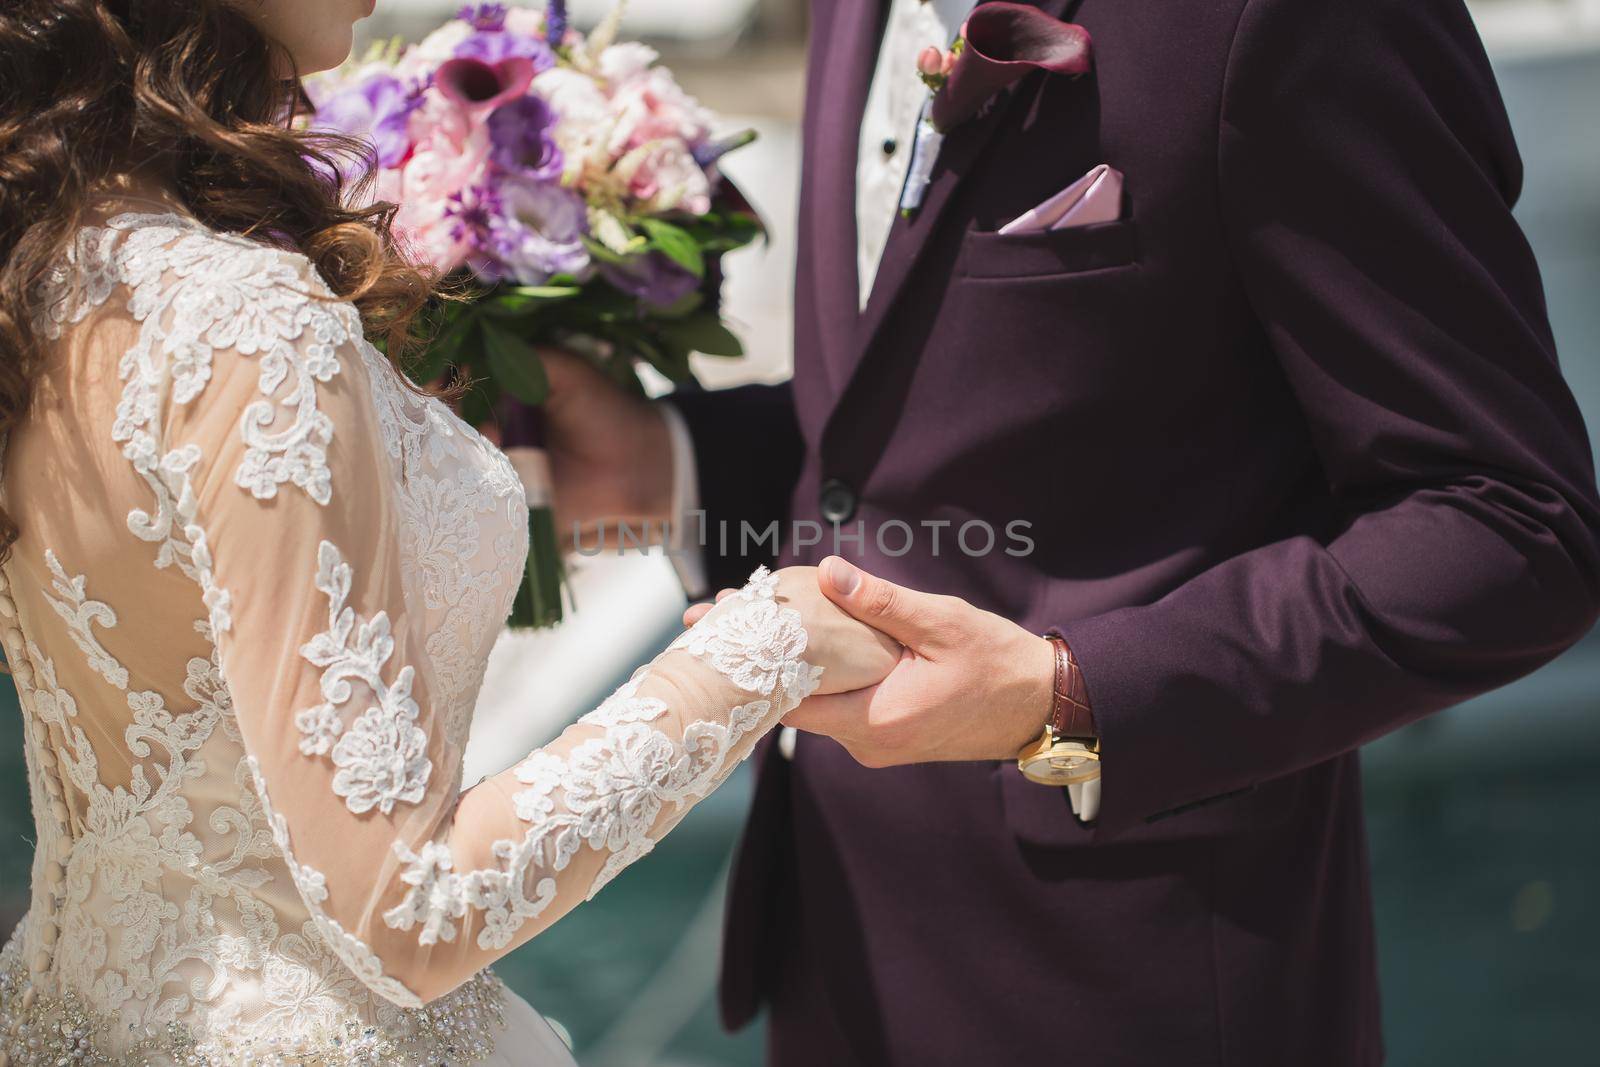 Close-up of the groom holding the bride's hand during the ceremony.